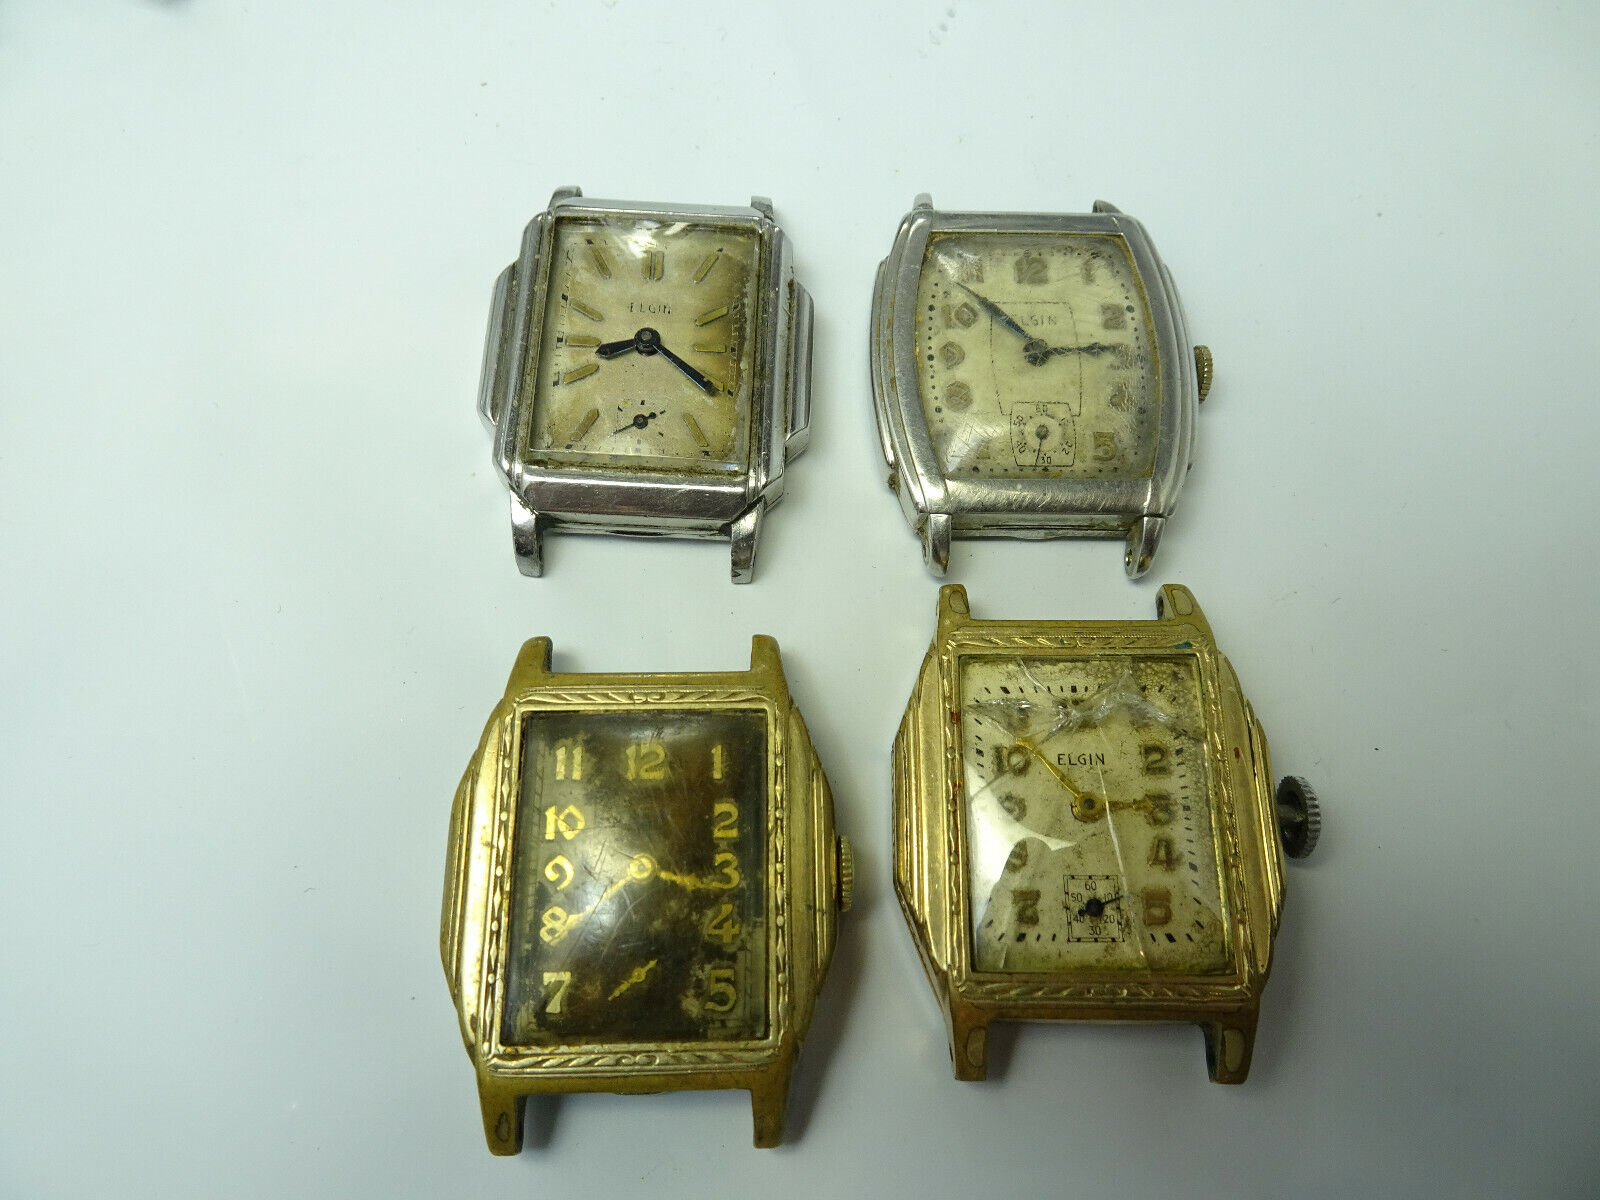 ELGIN STEPPED CASE WATCHES AND PARTS FOR RESTORATIONS OR TRENCH PARTS VINTAGE Elgin